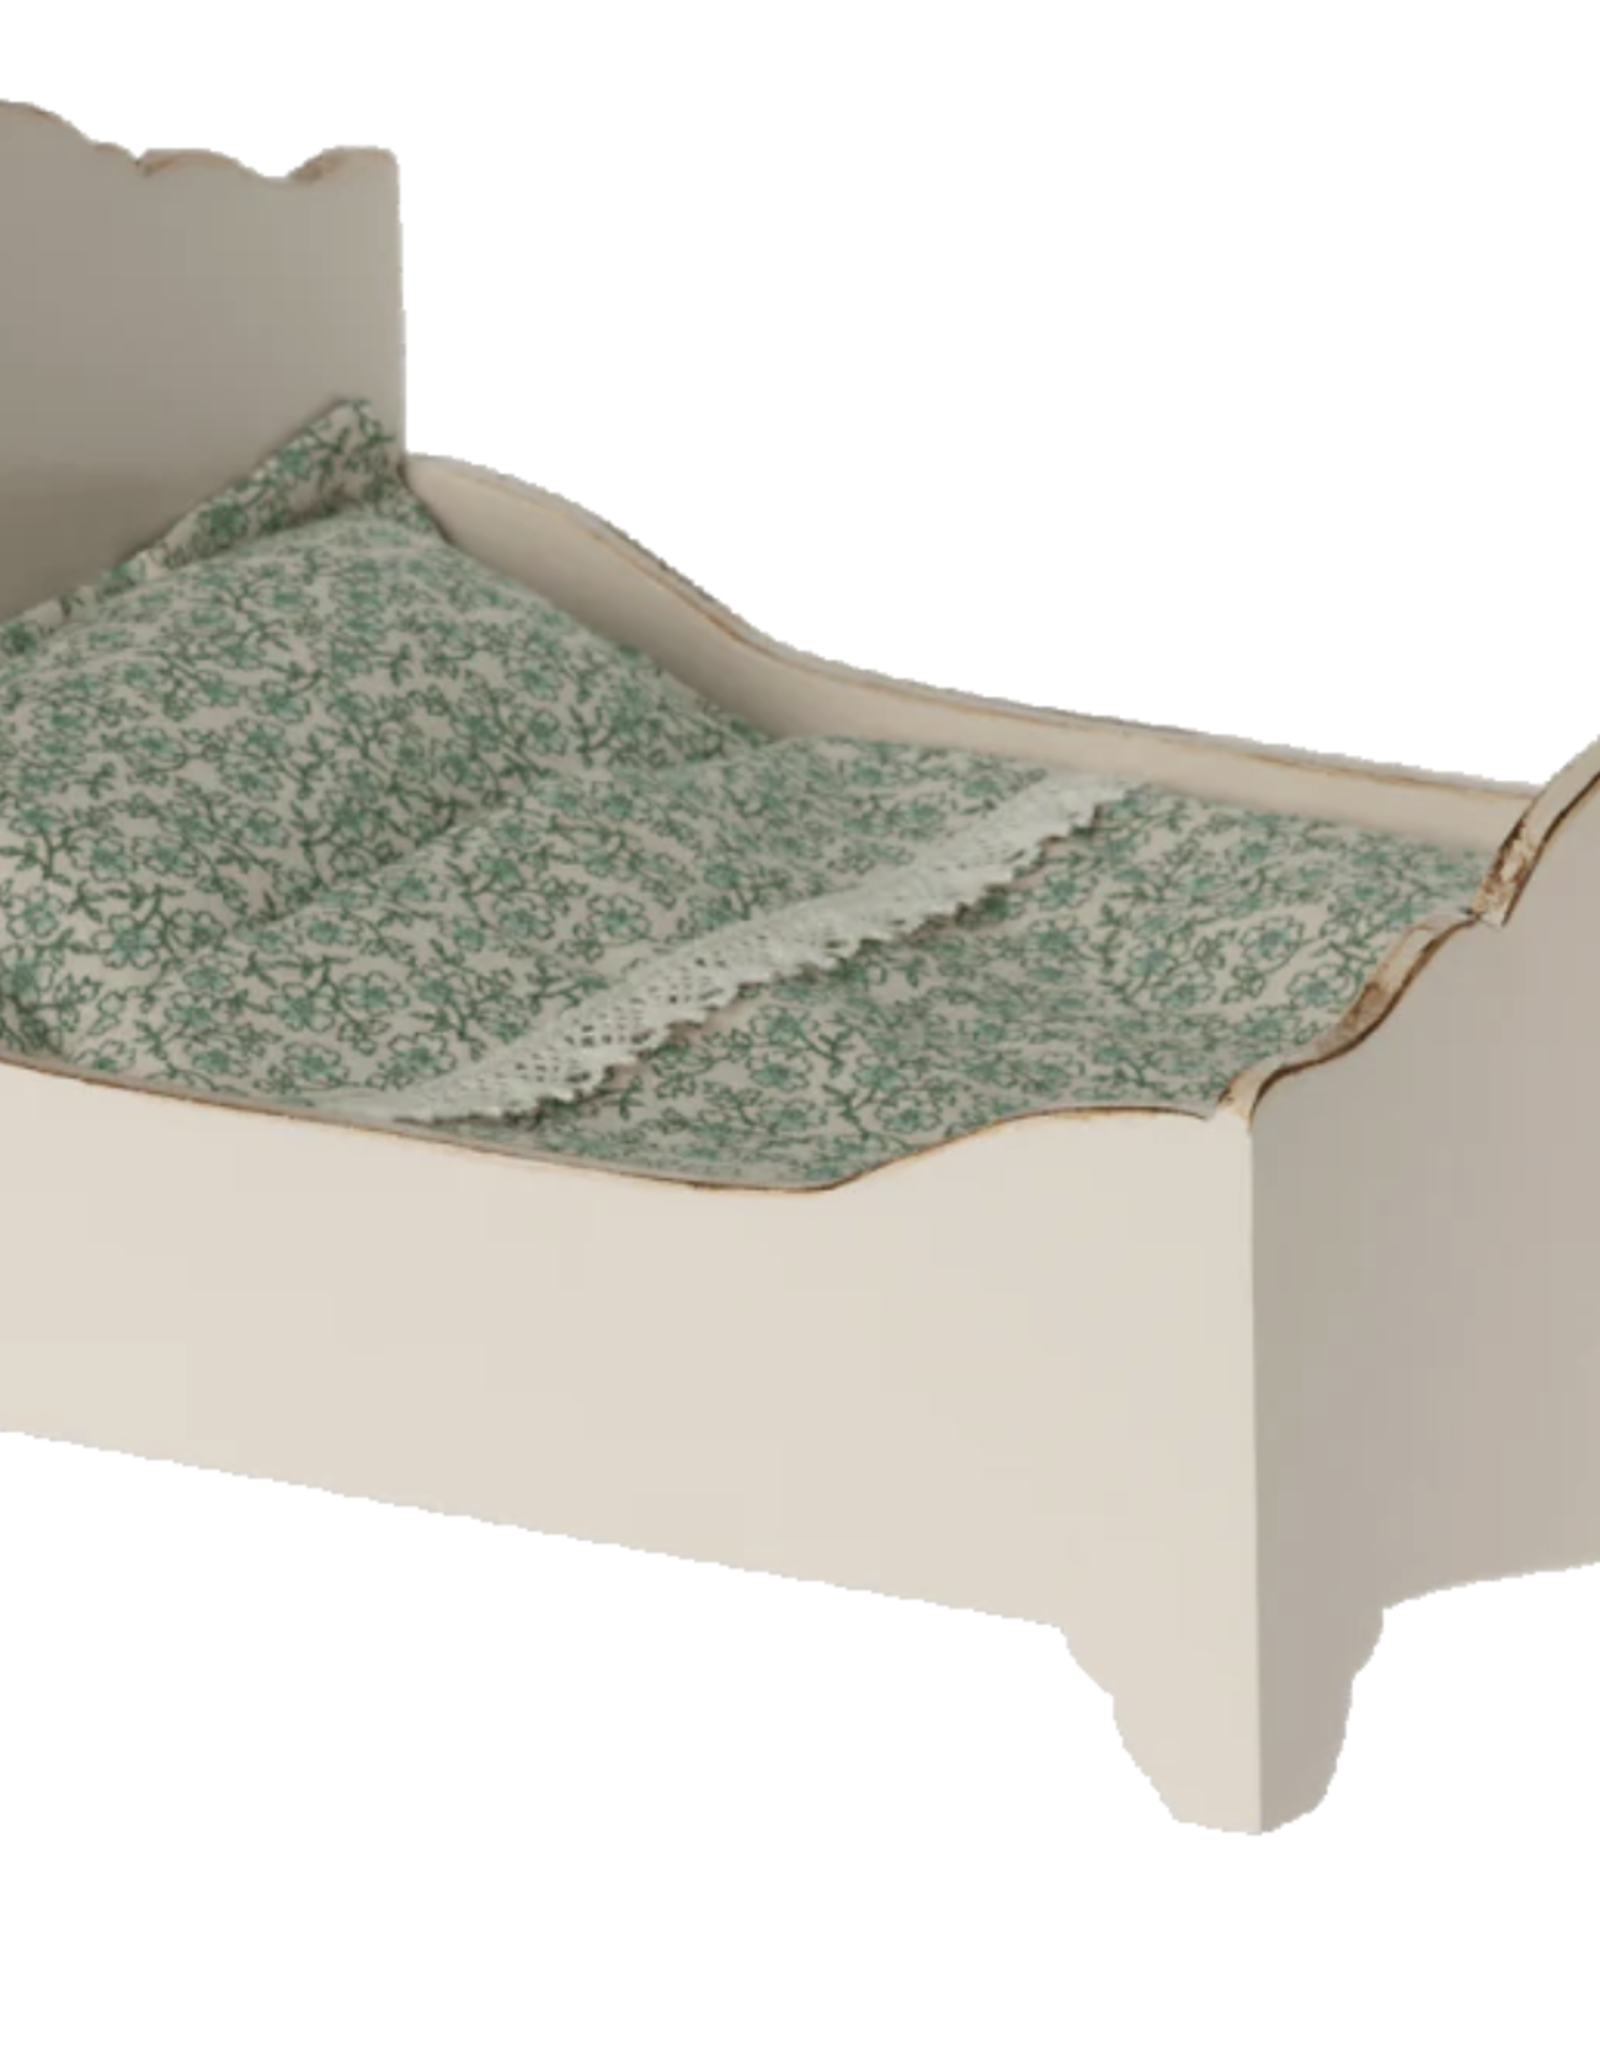 Maileg bed, mouse- off white